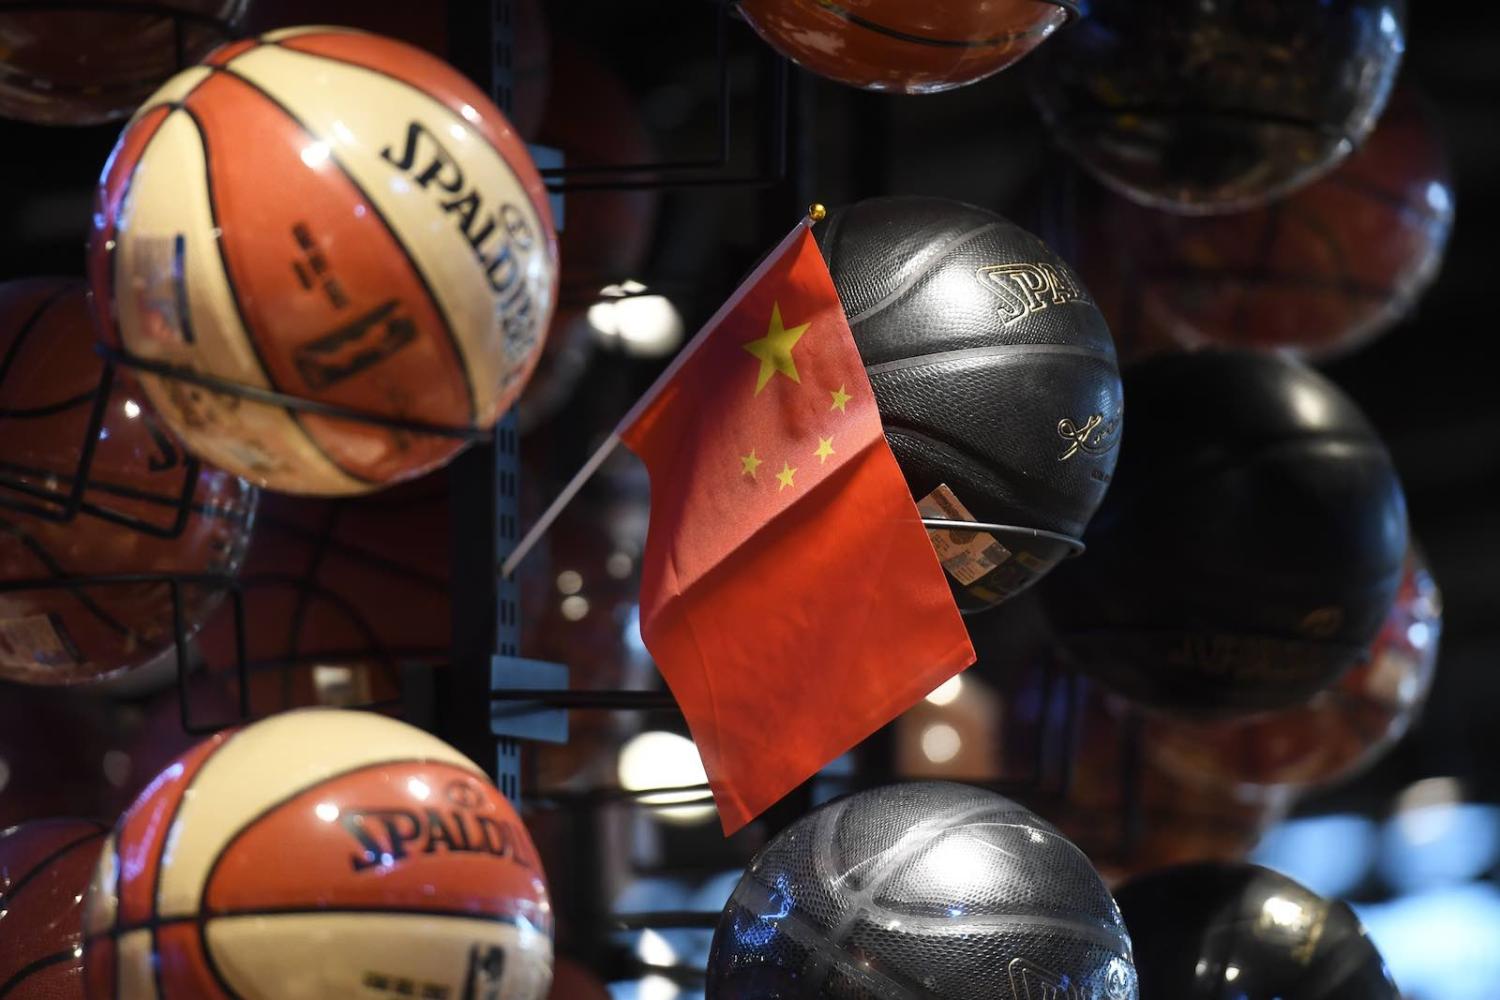 A Chinese flag is placed into a display of basketballs in the National Basketball Association (NBA) store in Beijing this month (Photo: Greg Baker/AFP/Getty Images)